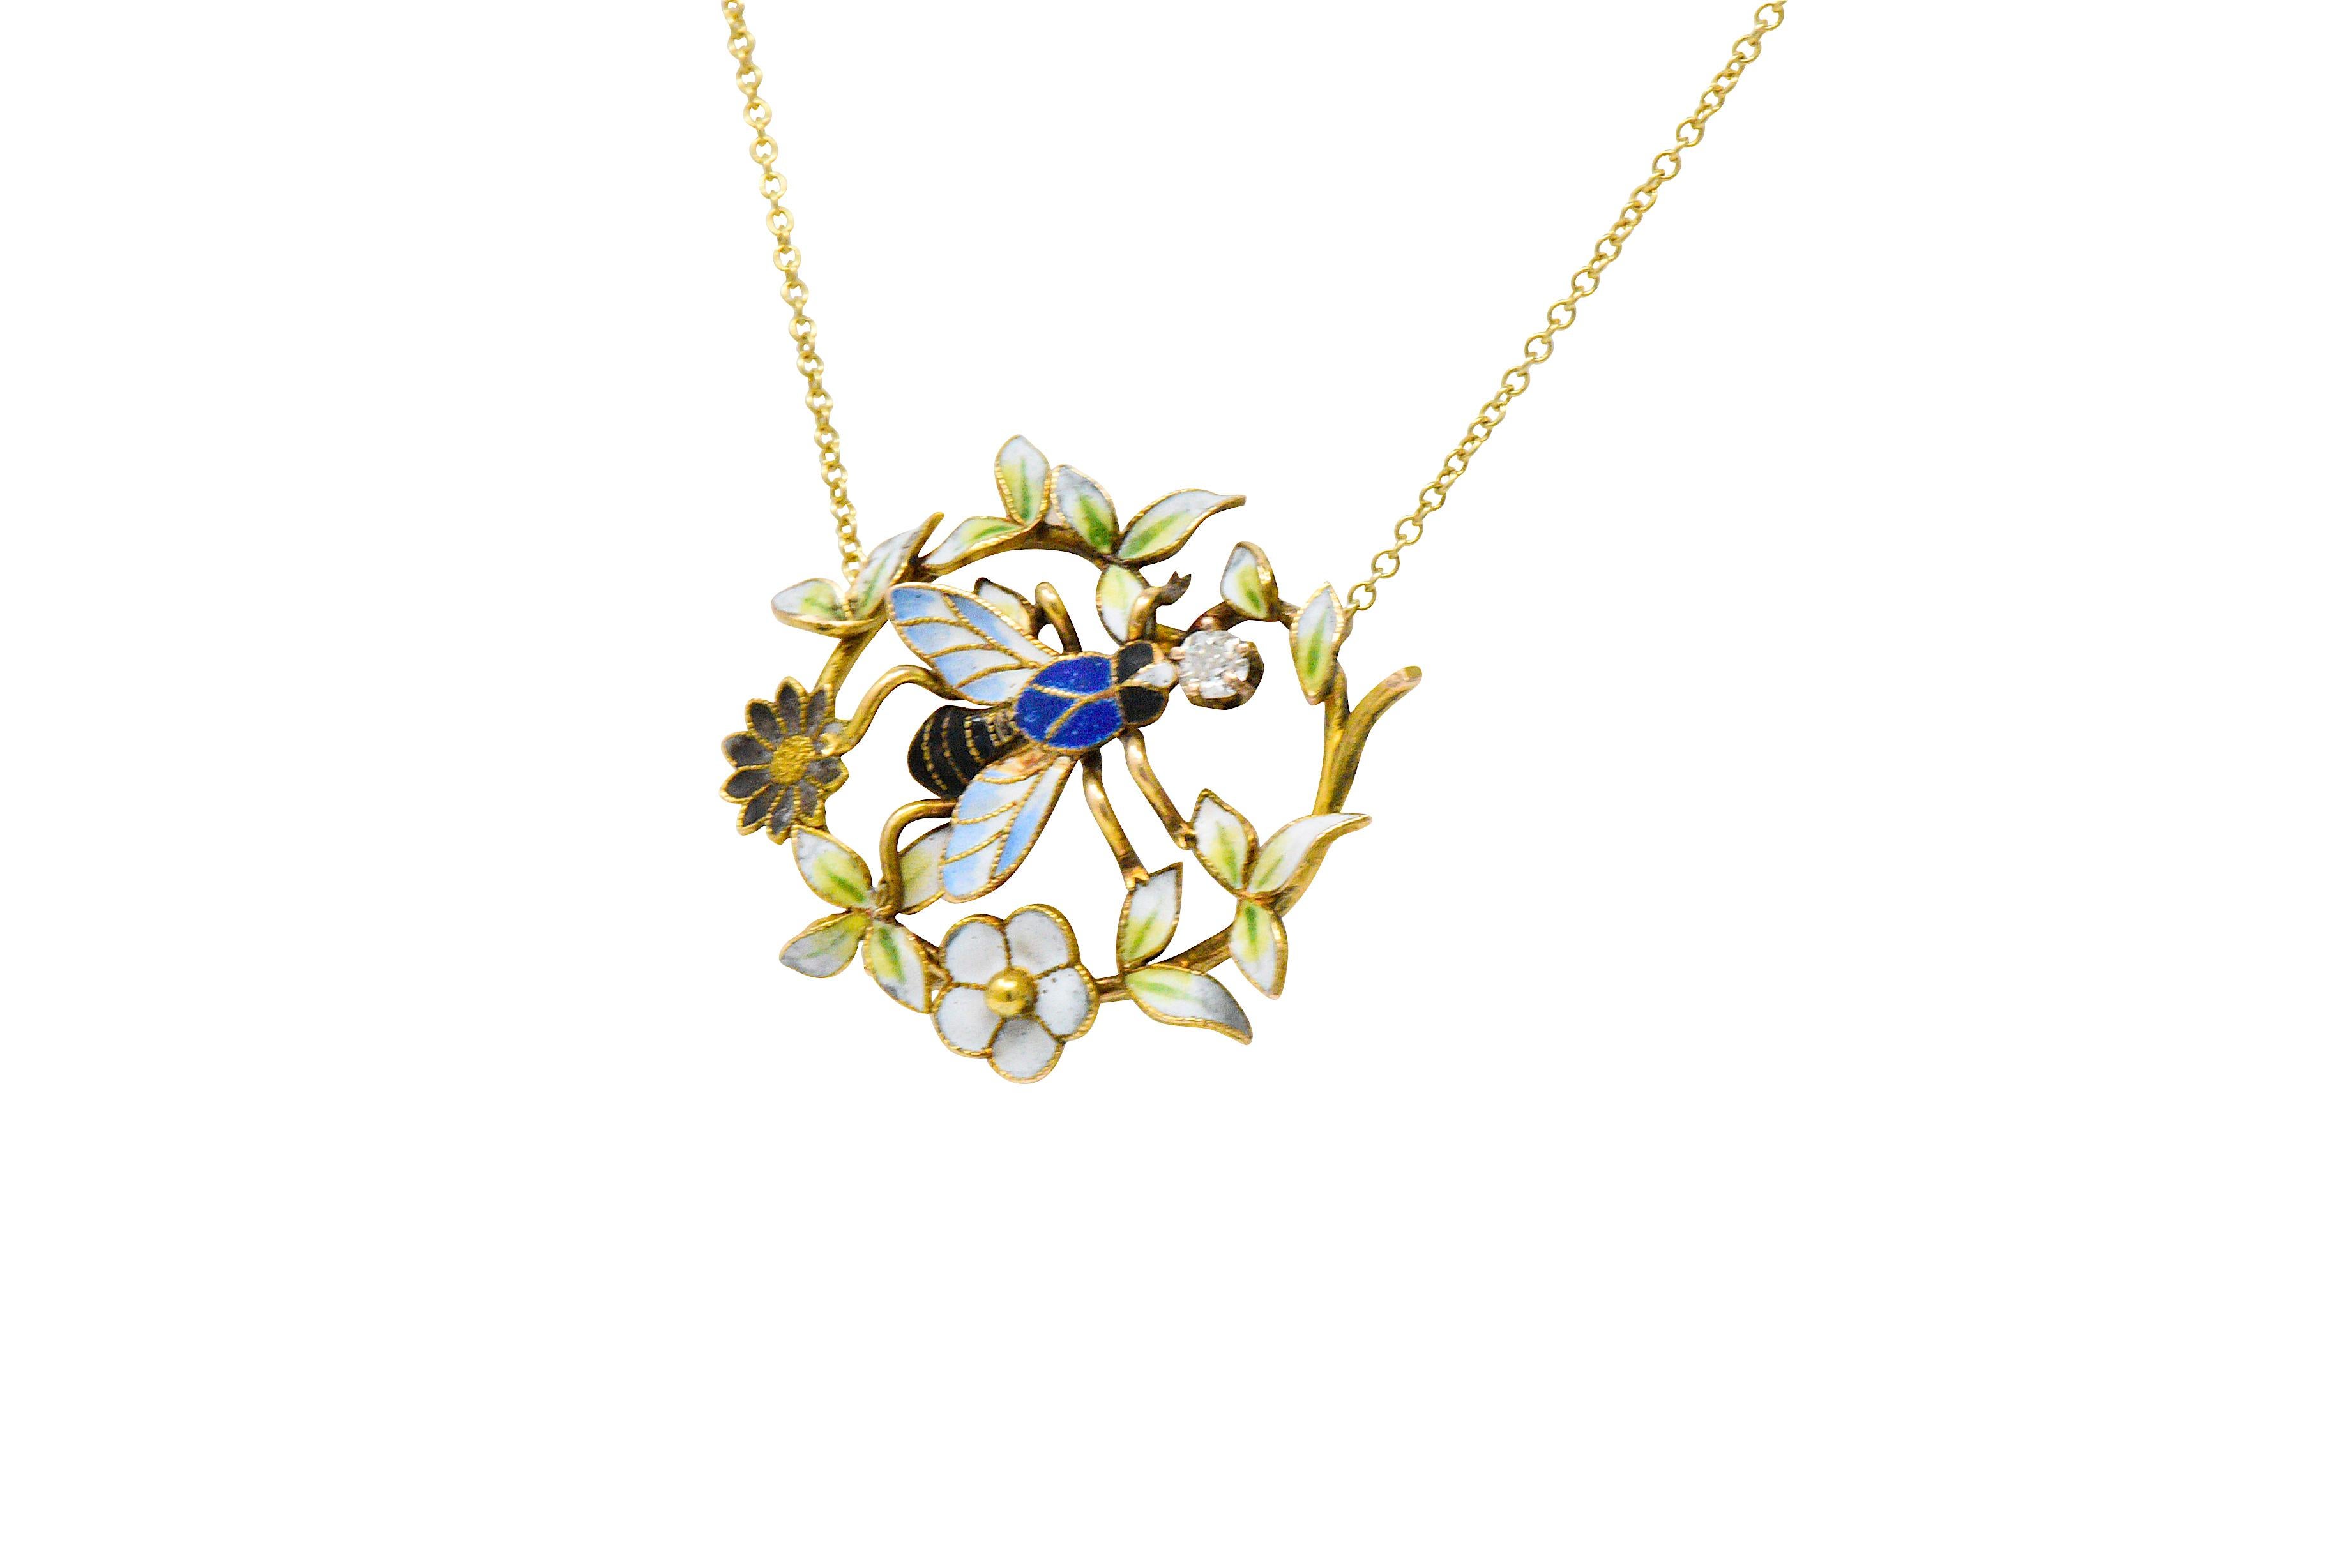 Centering an enamel bee with an old mine cut diamond weighing approximately 0.10 carat, eye-clean and white

Accented by bright colorful enamel flowers and leaves

Completed by a cable style chain, lobster clasp and Italian assay marks

Colorful and